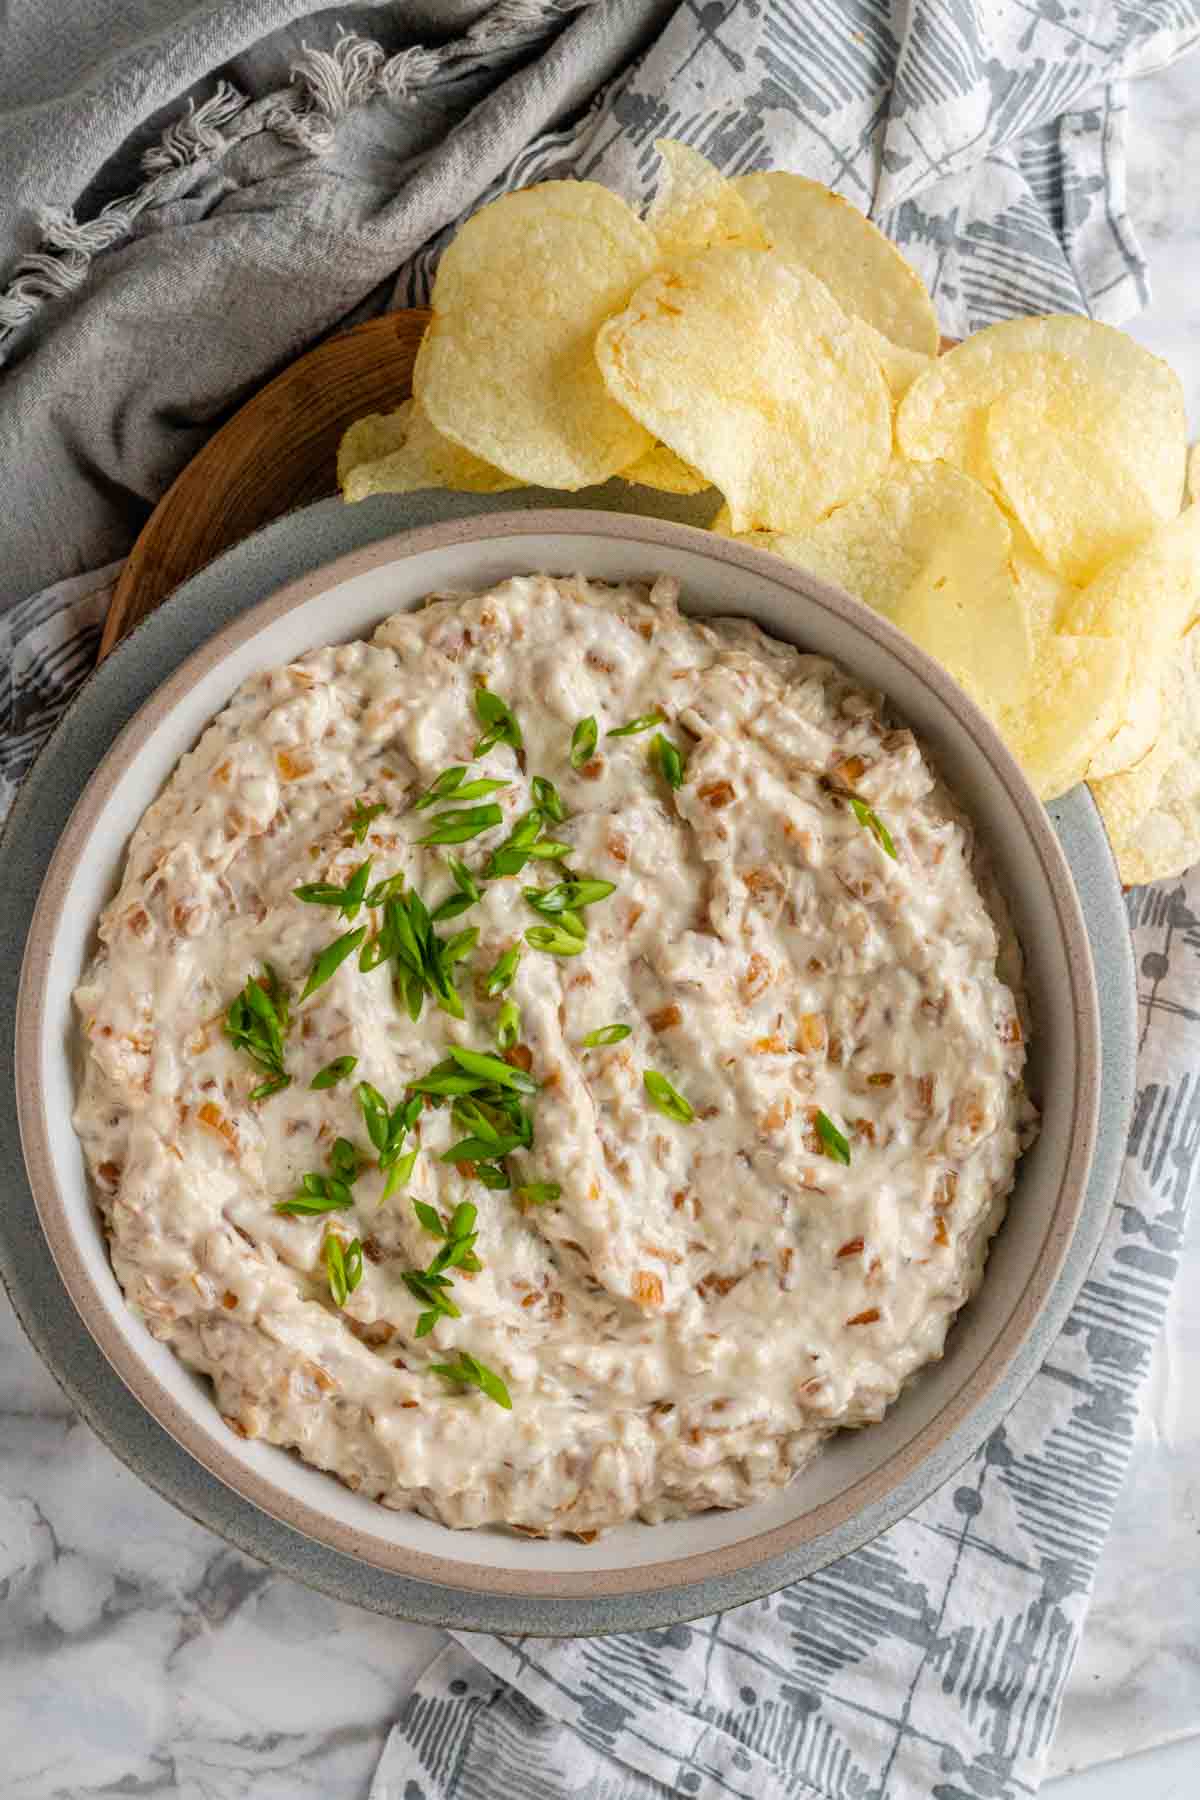 A yogurt dip in a bowl with onions in it and green onions on top beside potato chips.